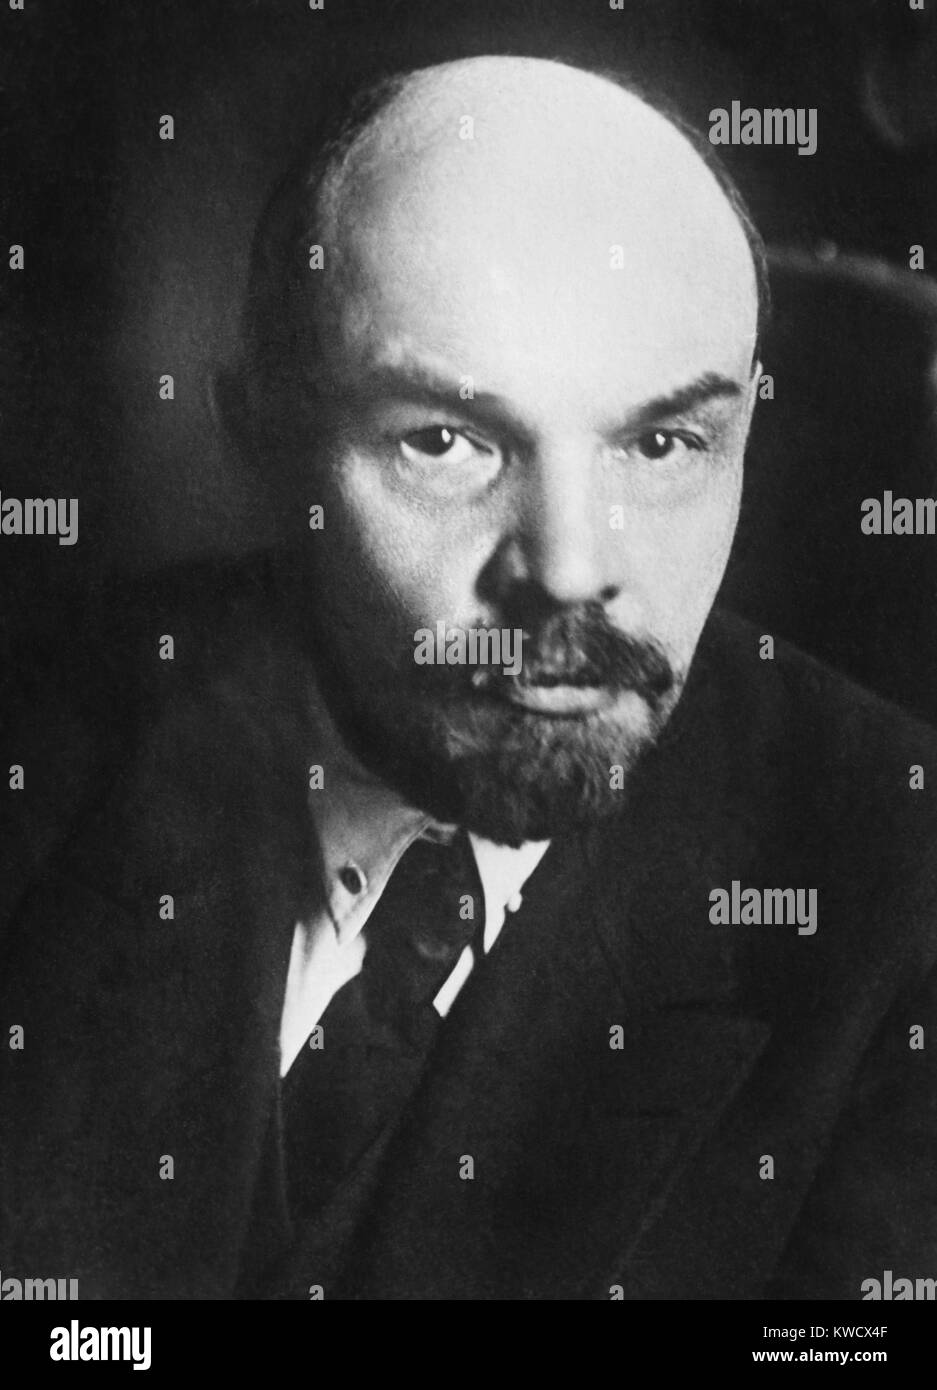 Vladimir Ilyich Ulyanov Lenin, head of government of the Soviet Union, 1919. His government faced civil war and famines as they began to build their socialist society (BSLOC 2017 2 16) Stock Photo